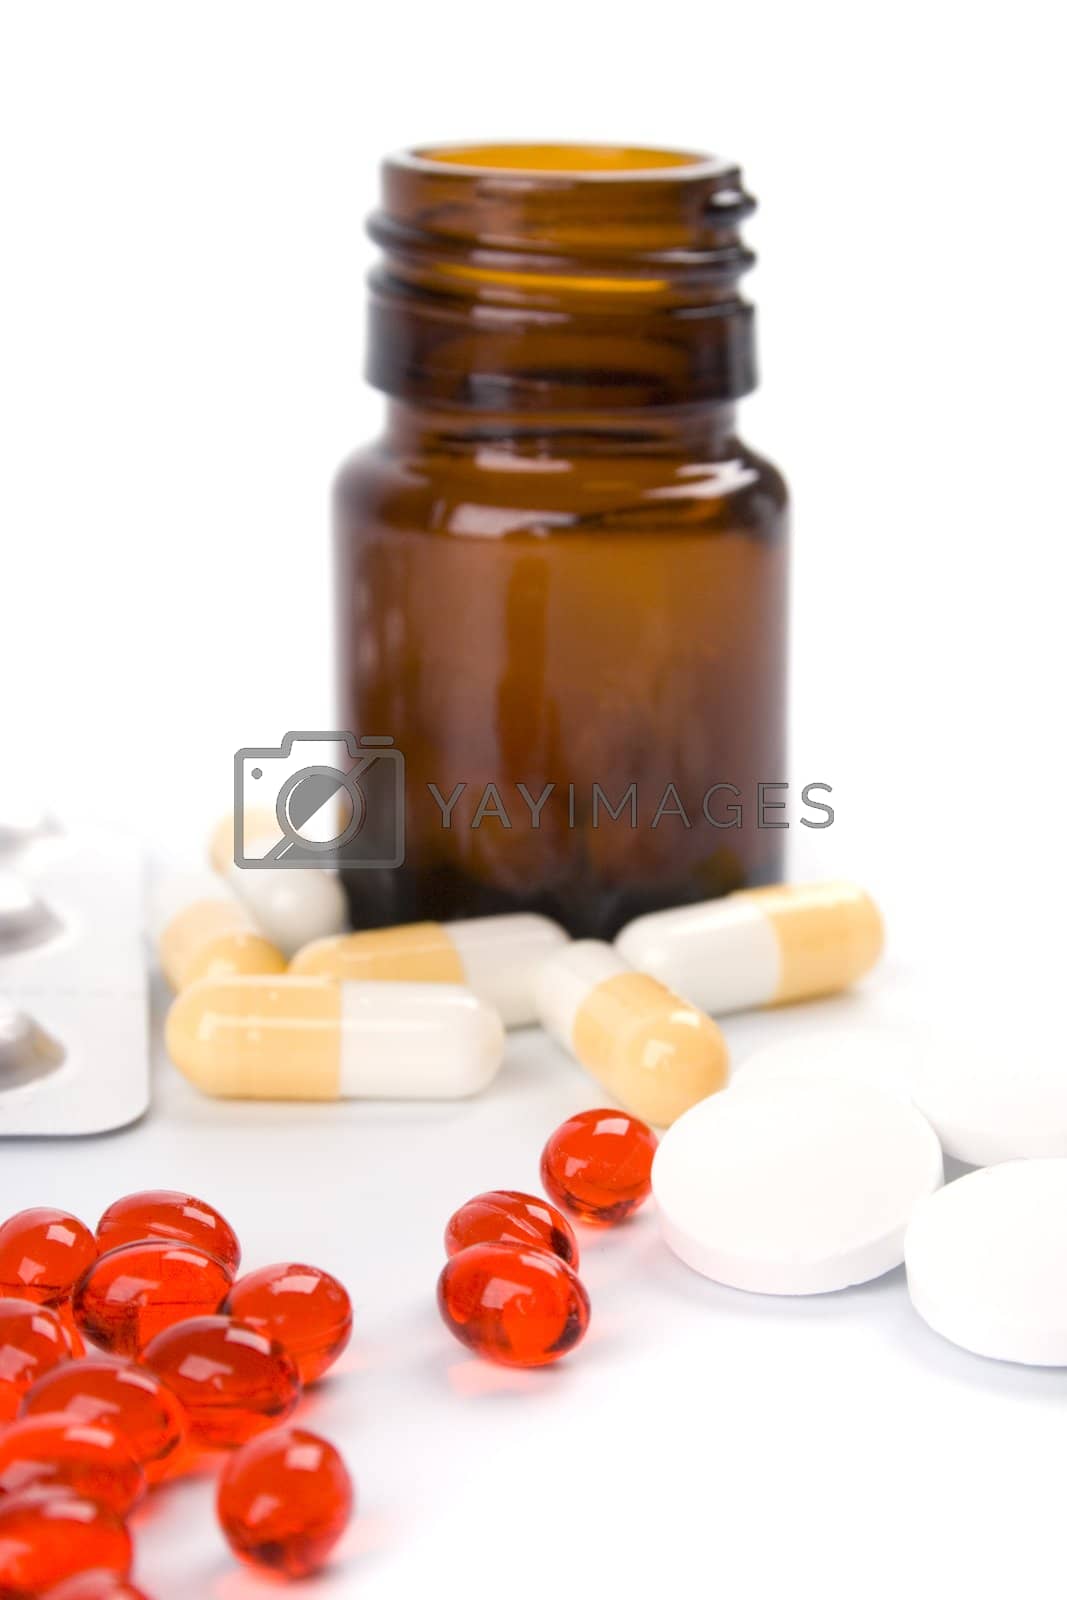 Royalty free image of different pills by marylooo